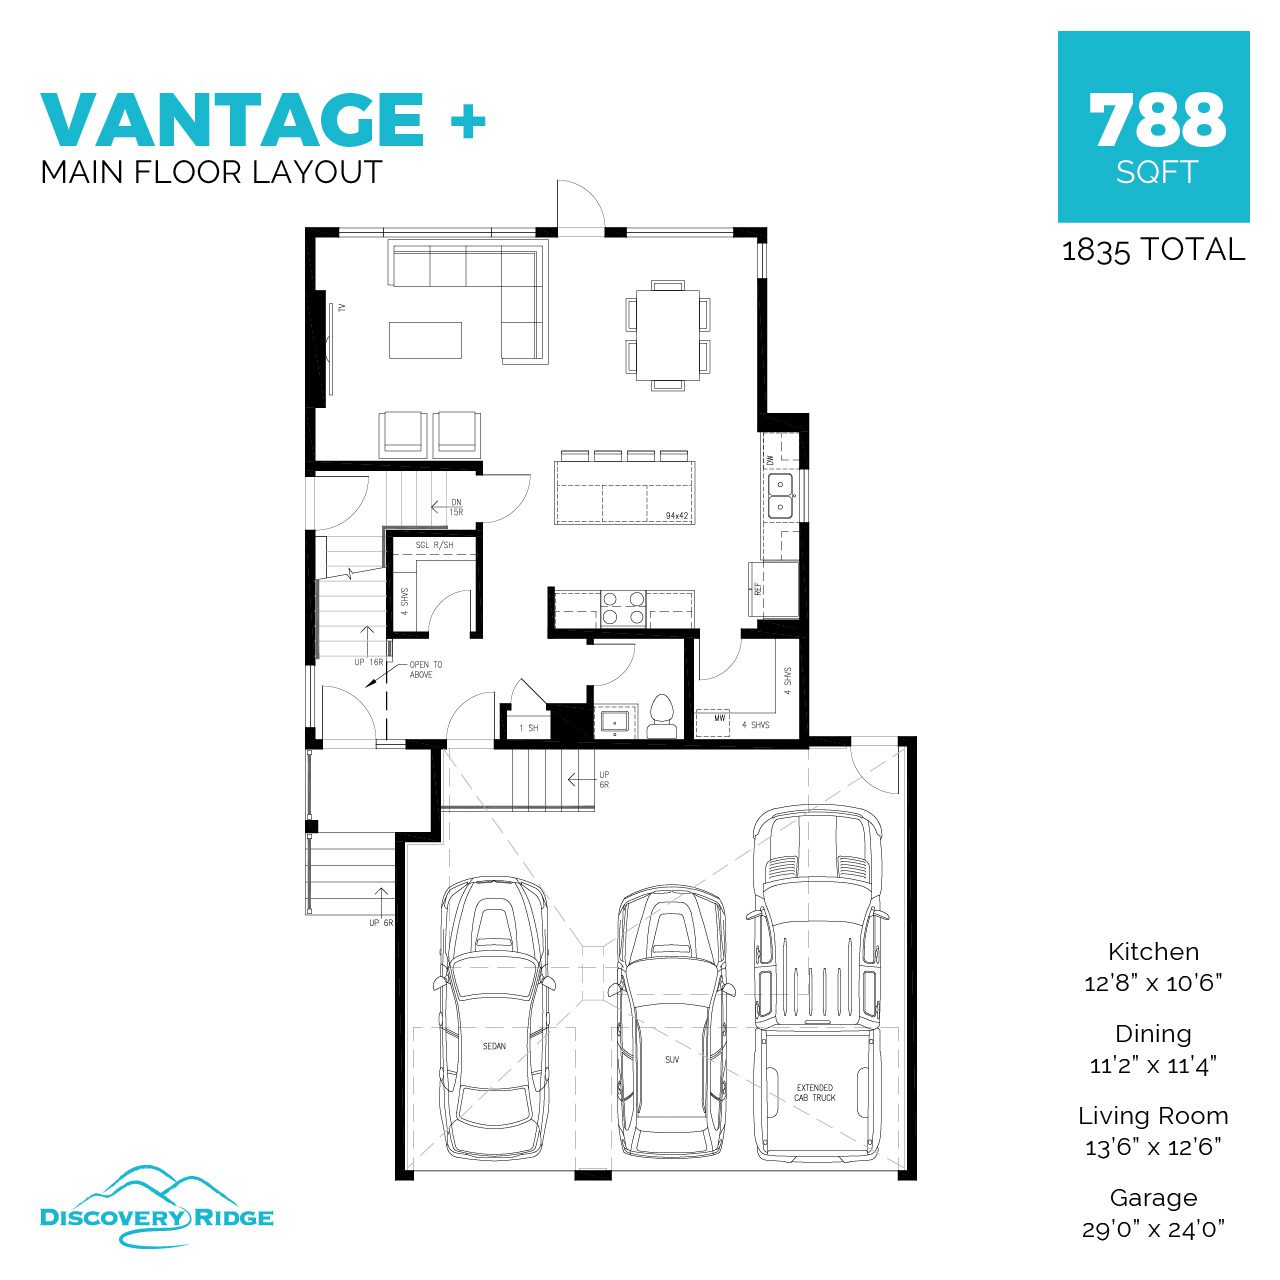 A two-storey home in Pilot Butte featuring a floor plan of the main level.